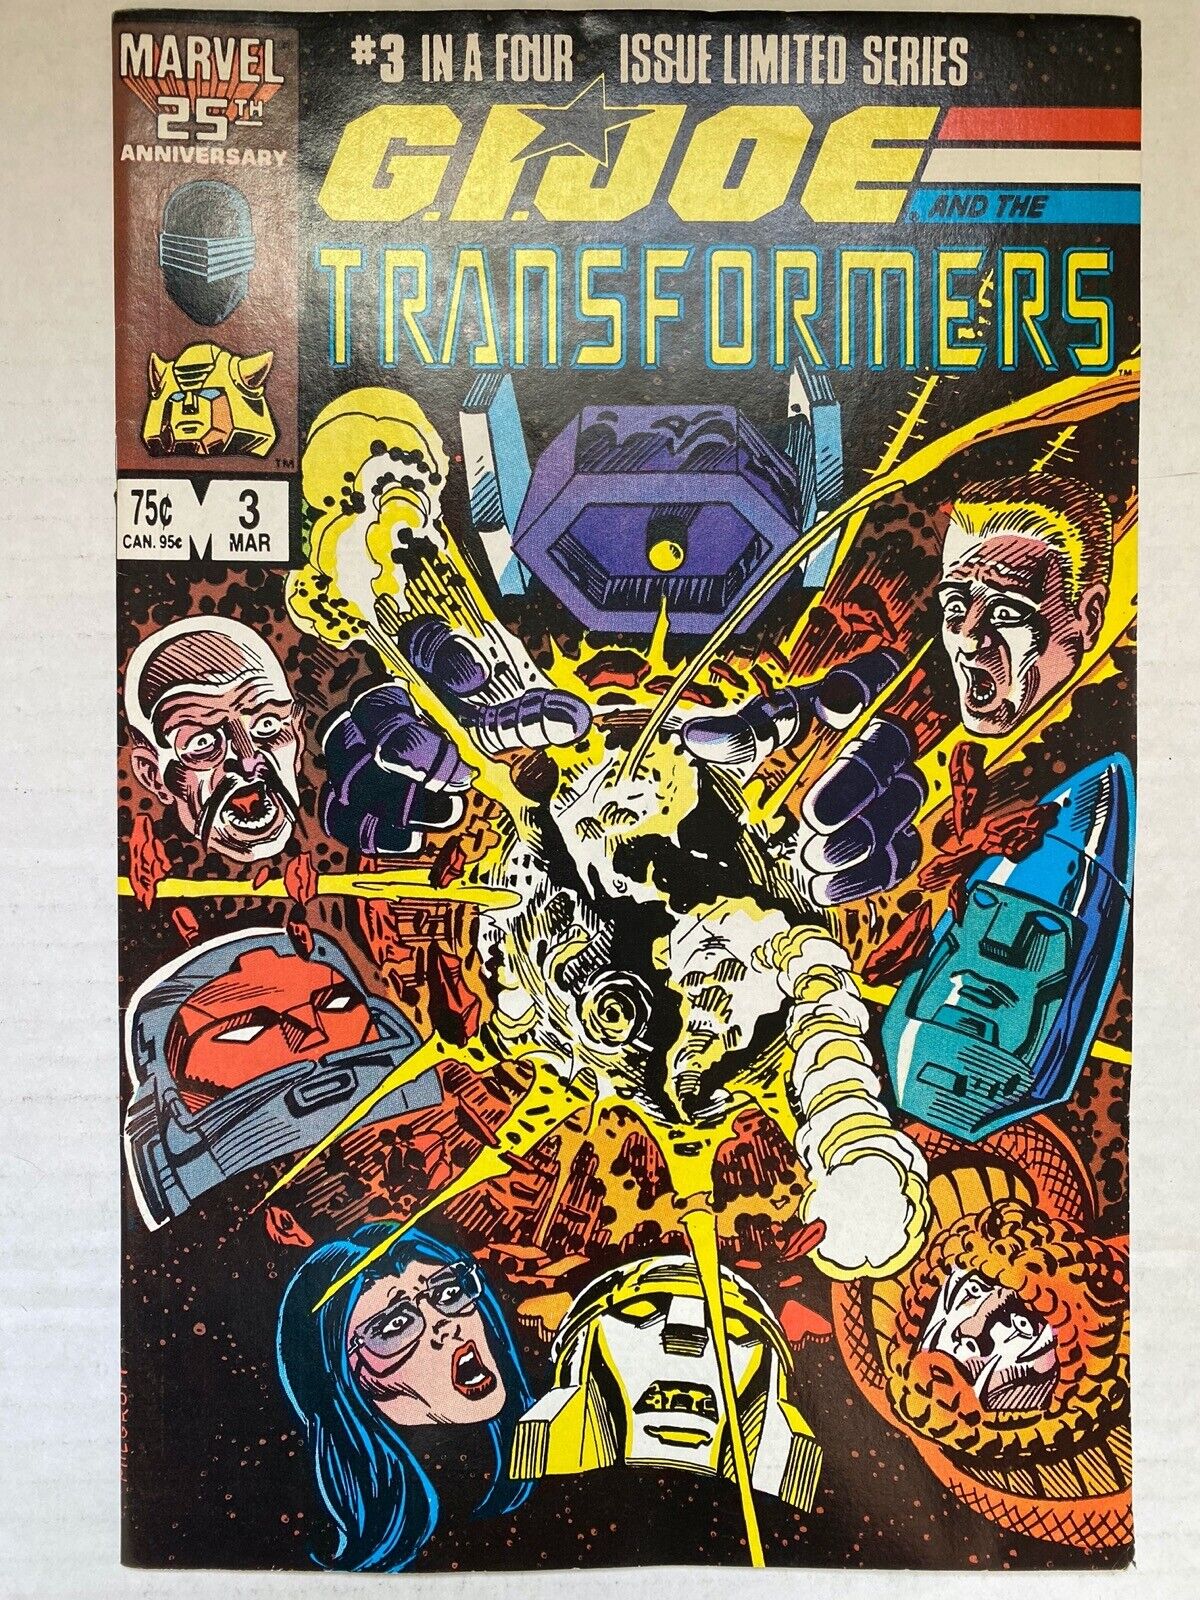  G.I. JOE TRANSFORMERS #3 (of 4) : Ashes, Ashes... 1987 CROSSOVER Marvel Comics